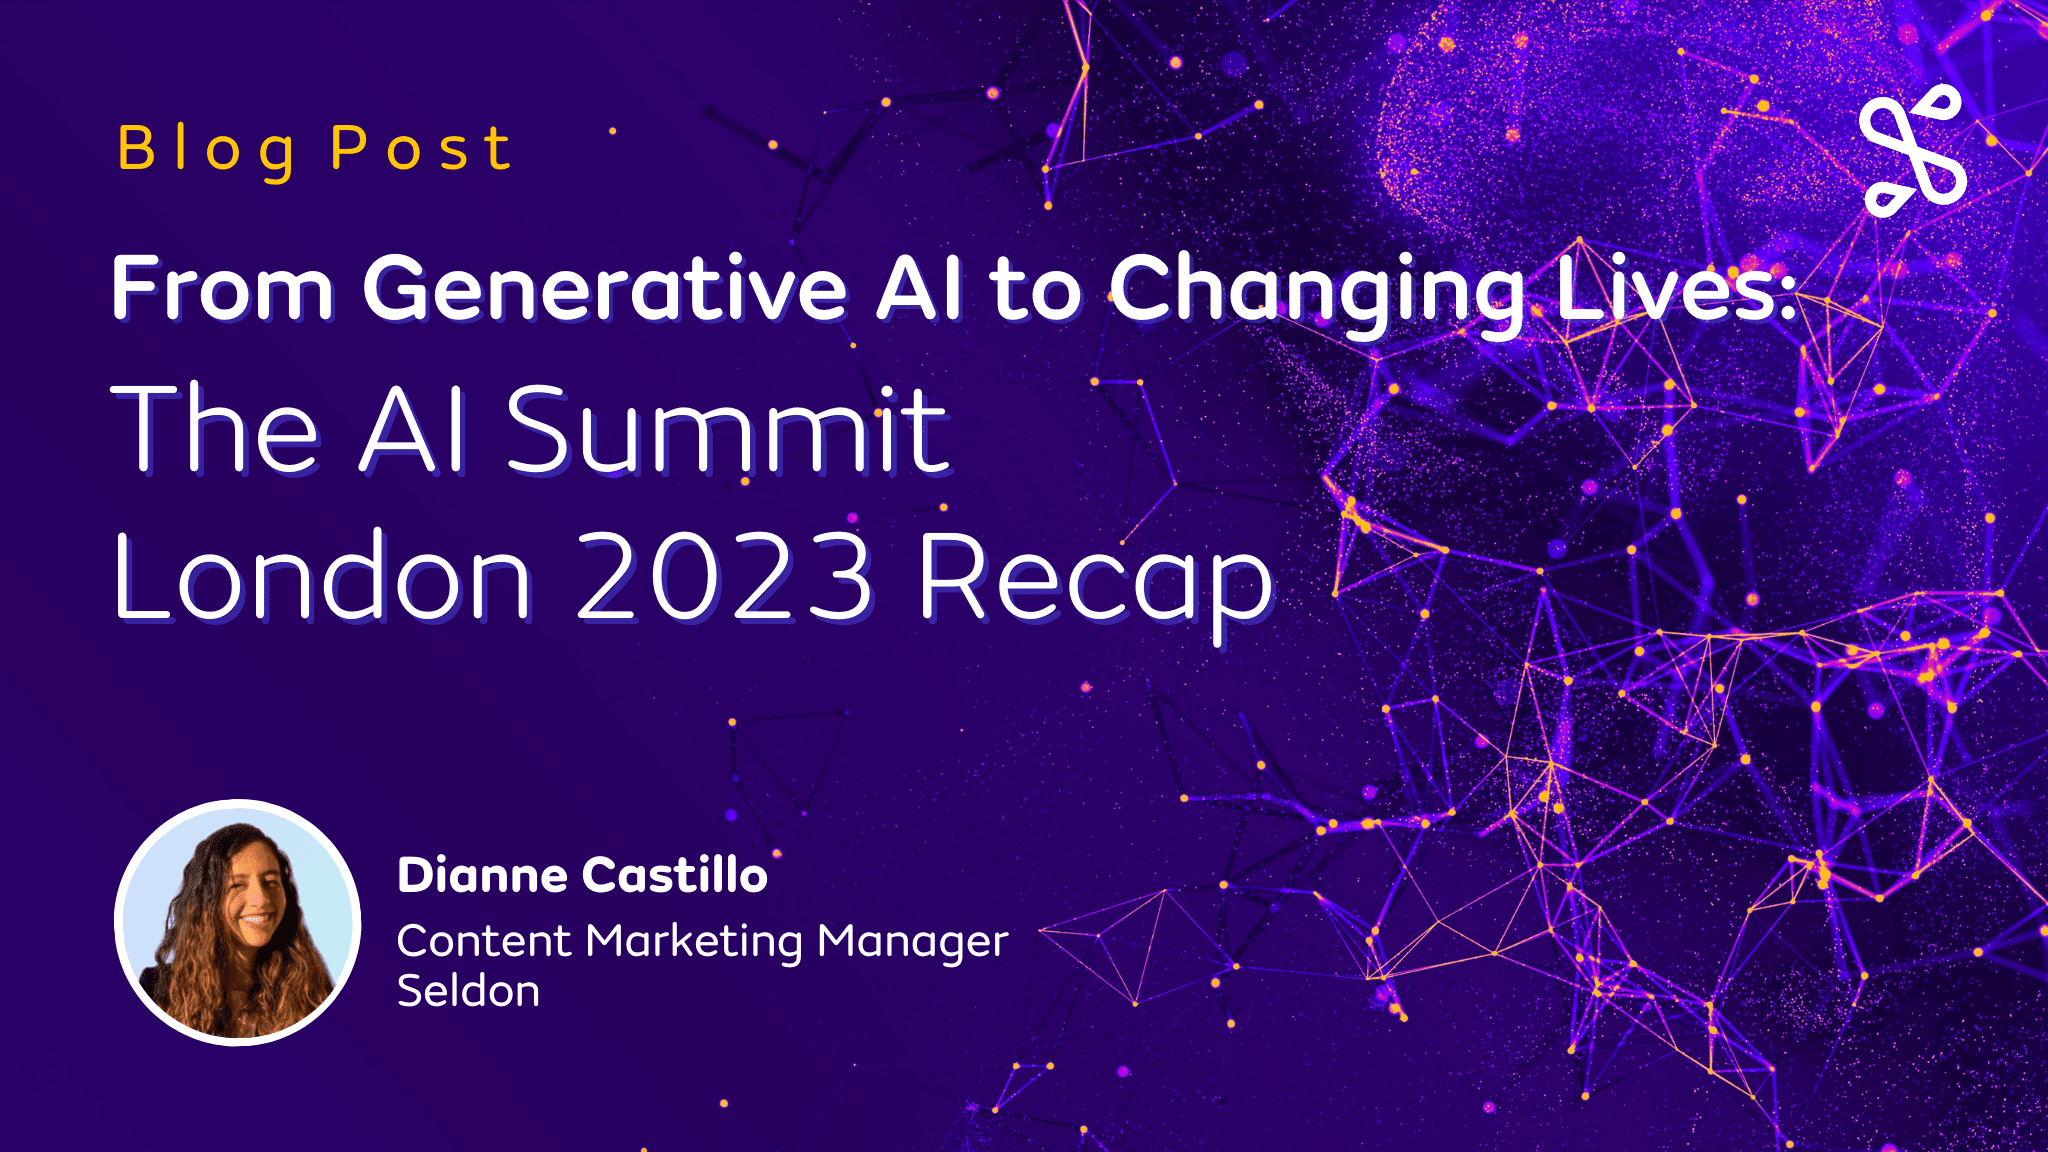 From Generative AI to Changing Lives: The AI Summit London 2023 Recap